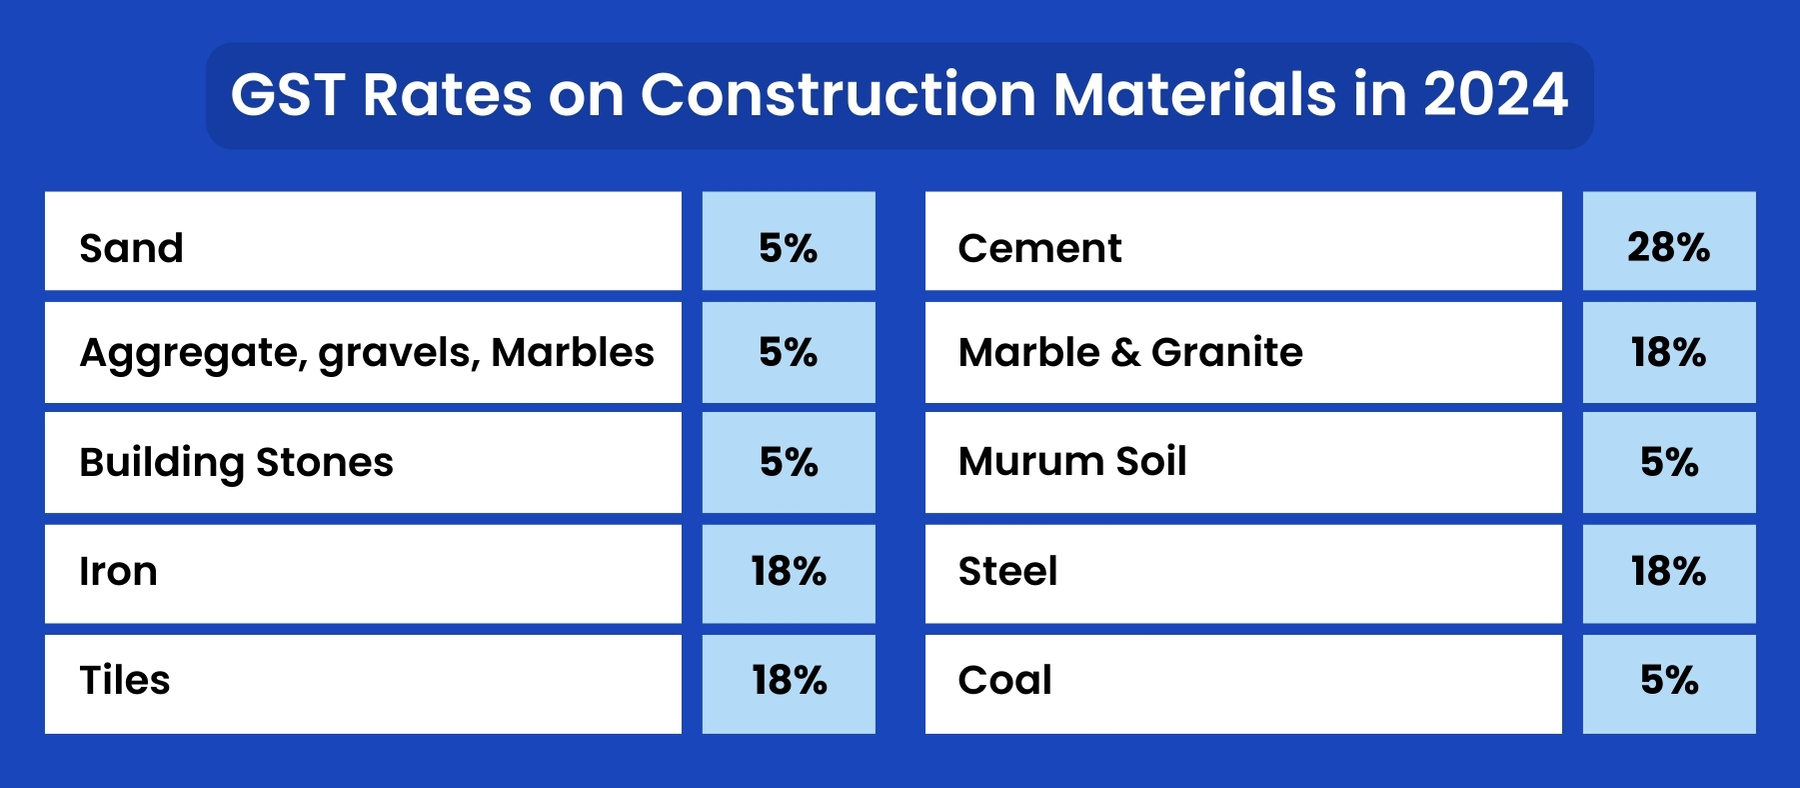 GST Rates on Construction Materials in 2024 